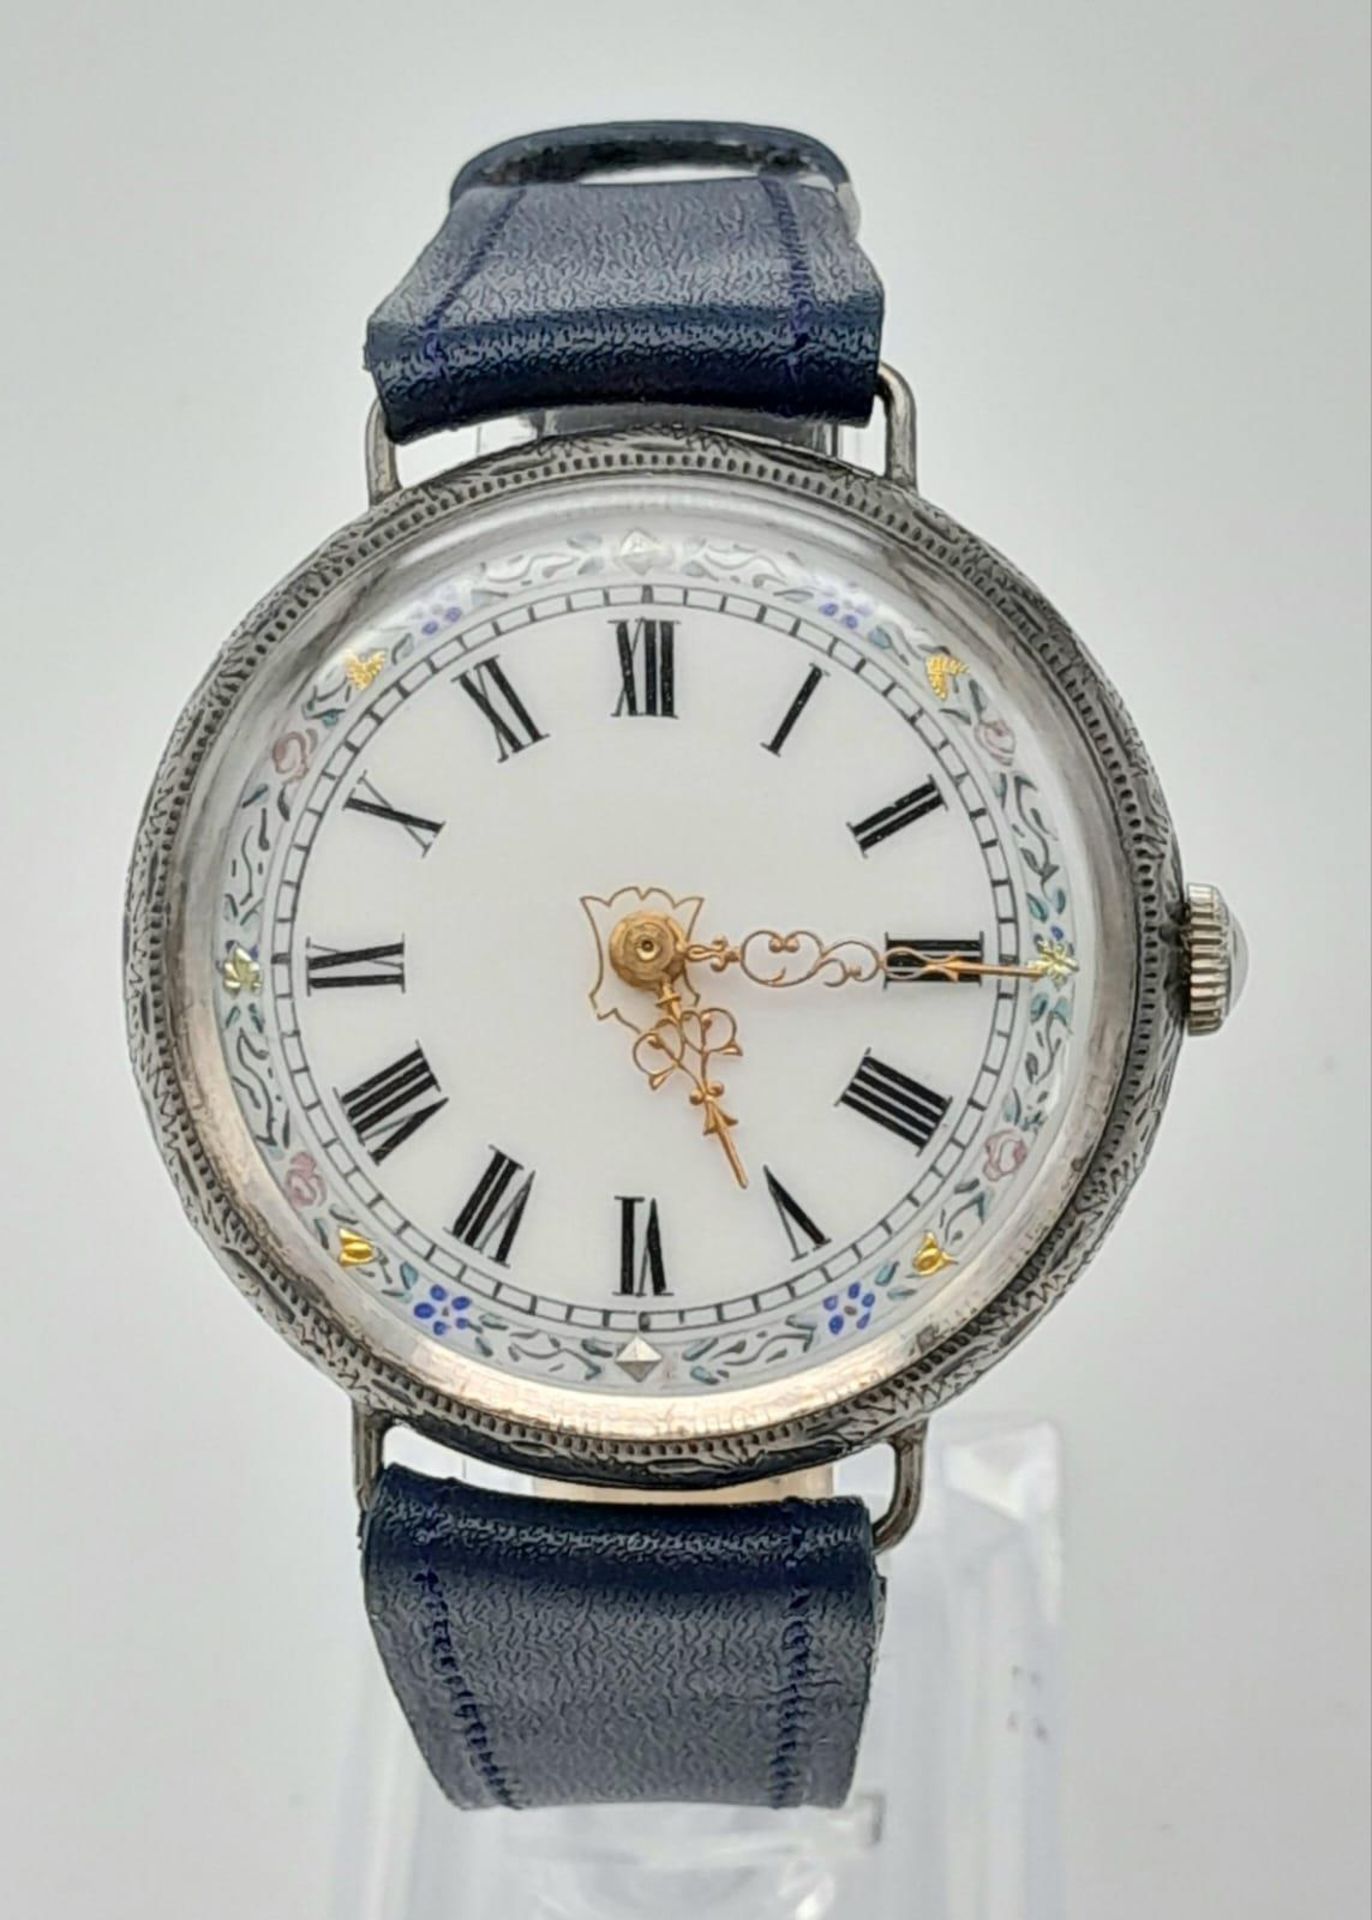 A Unique, Antique (1885) Sterling Silver Converted Fob Watch! This beautiful timepiece was made by